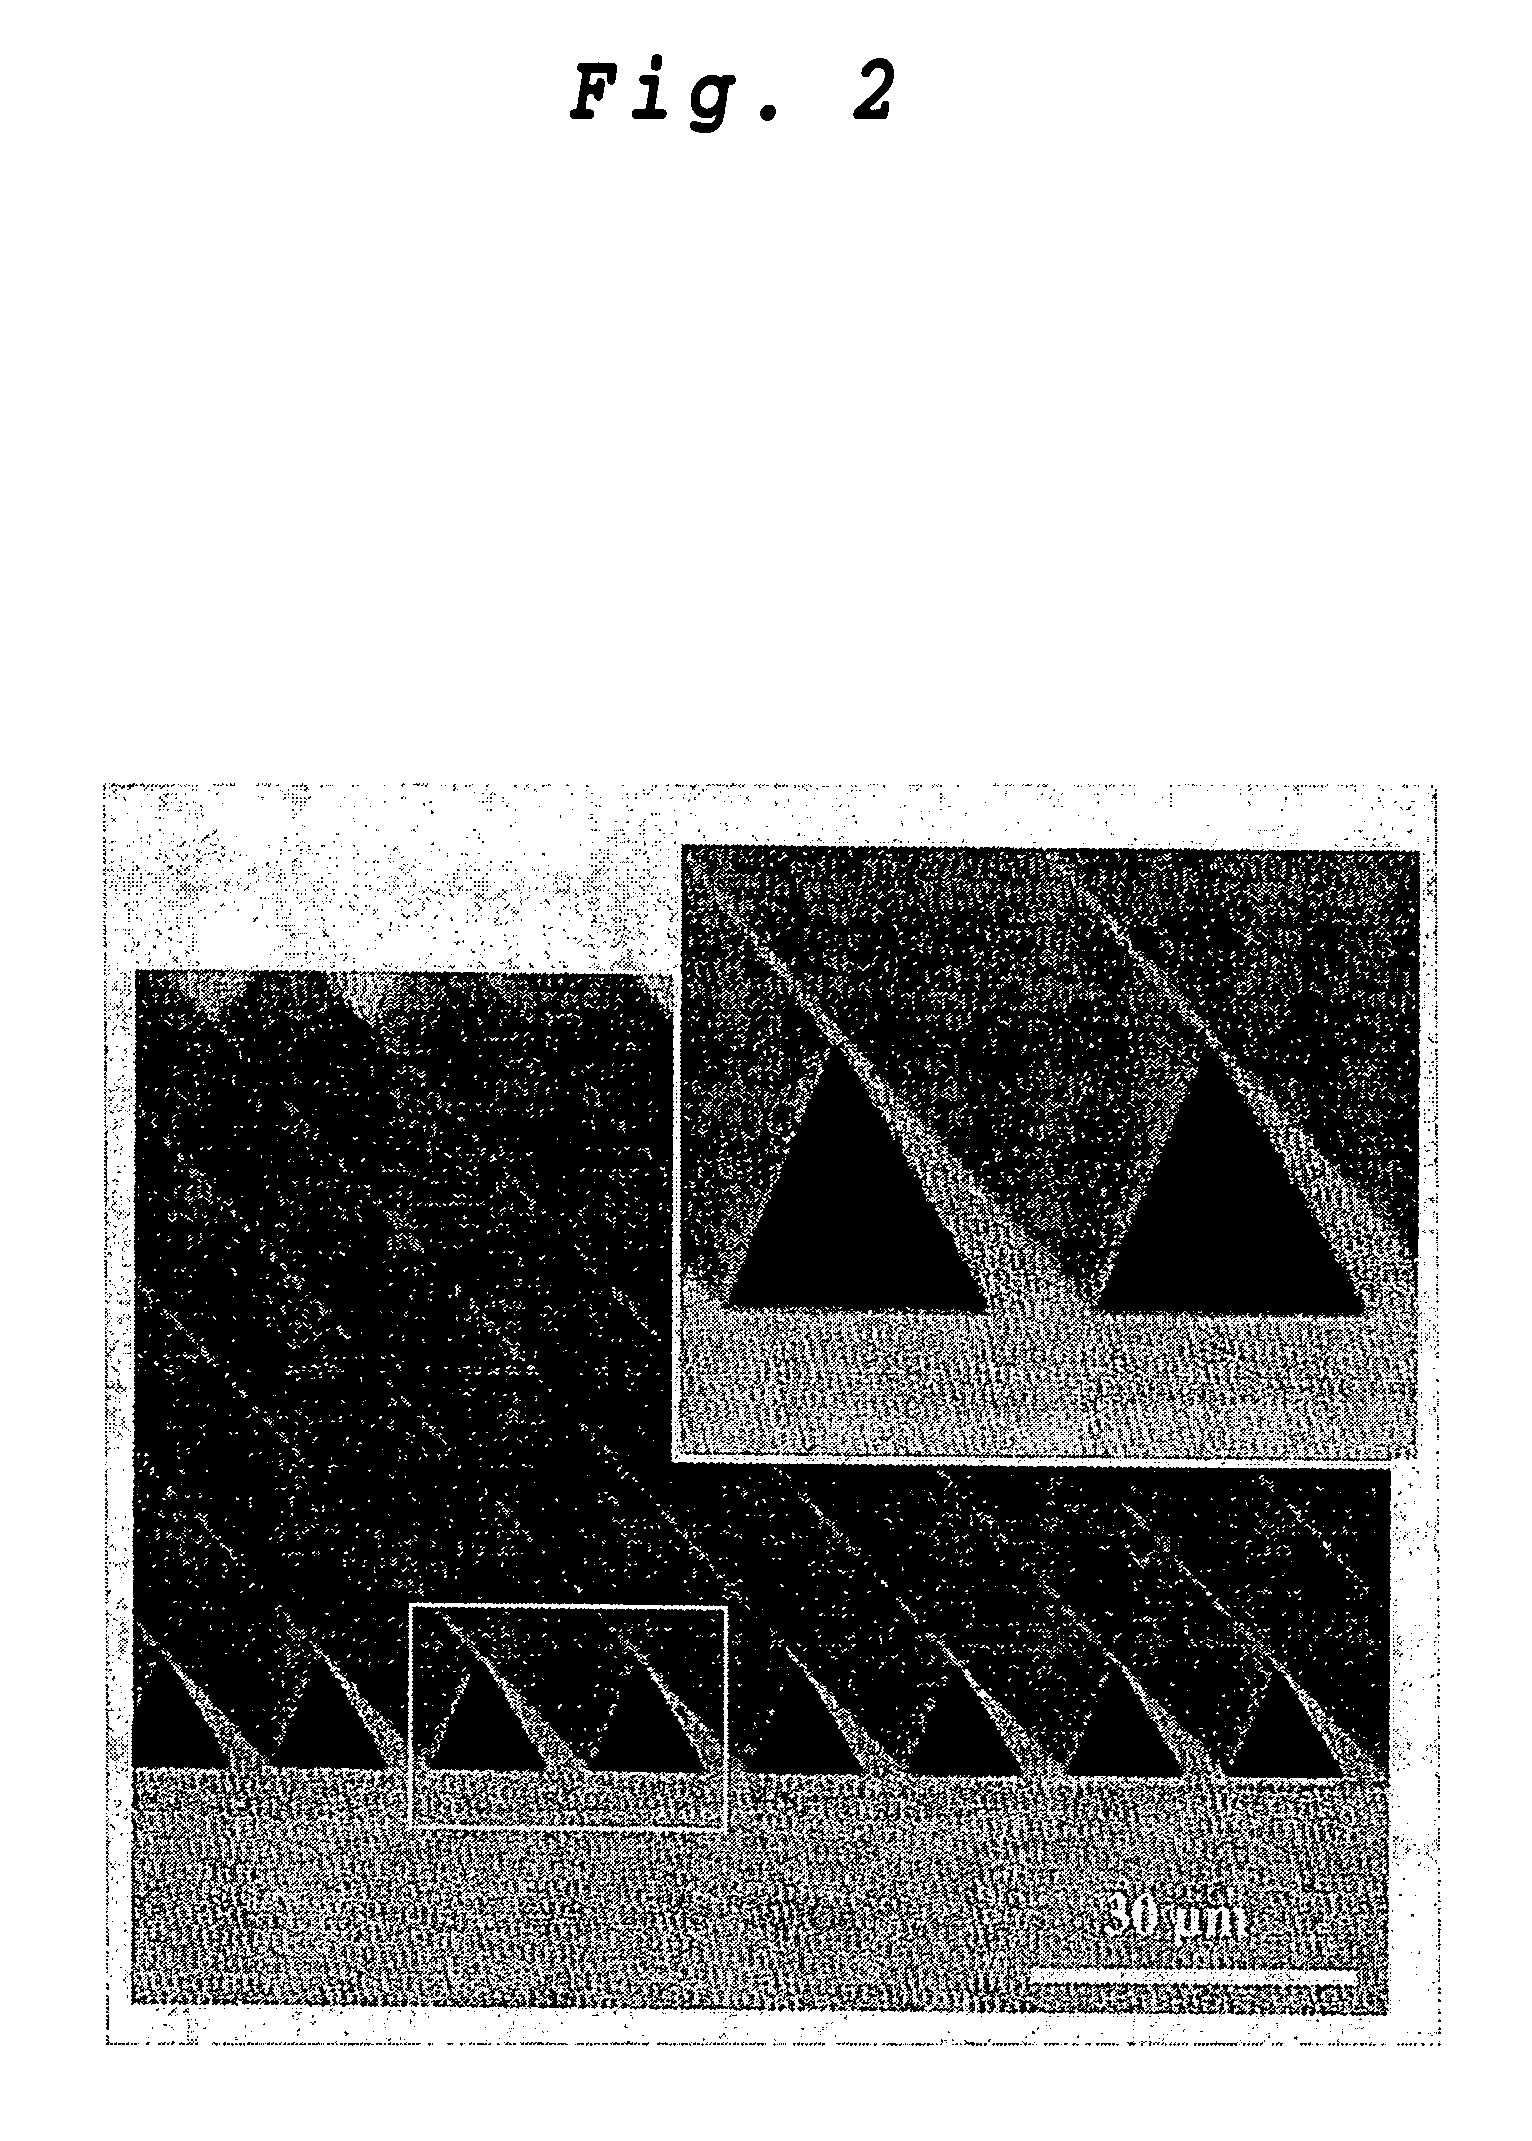 Method of fabricating mold for glass press